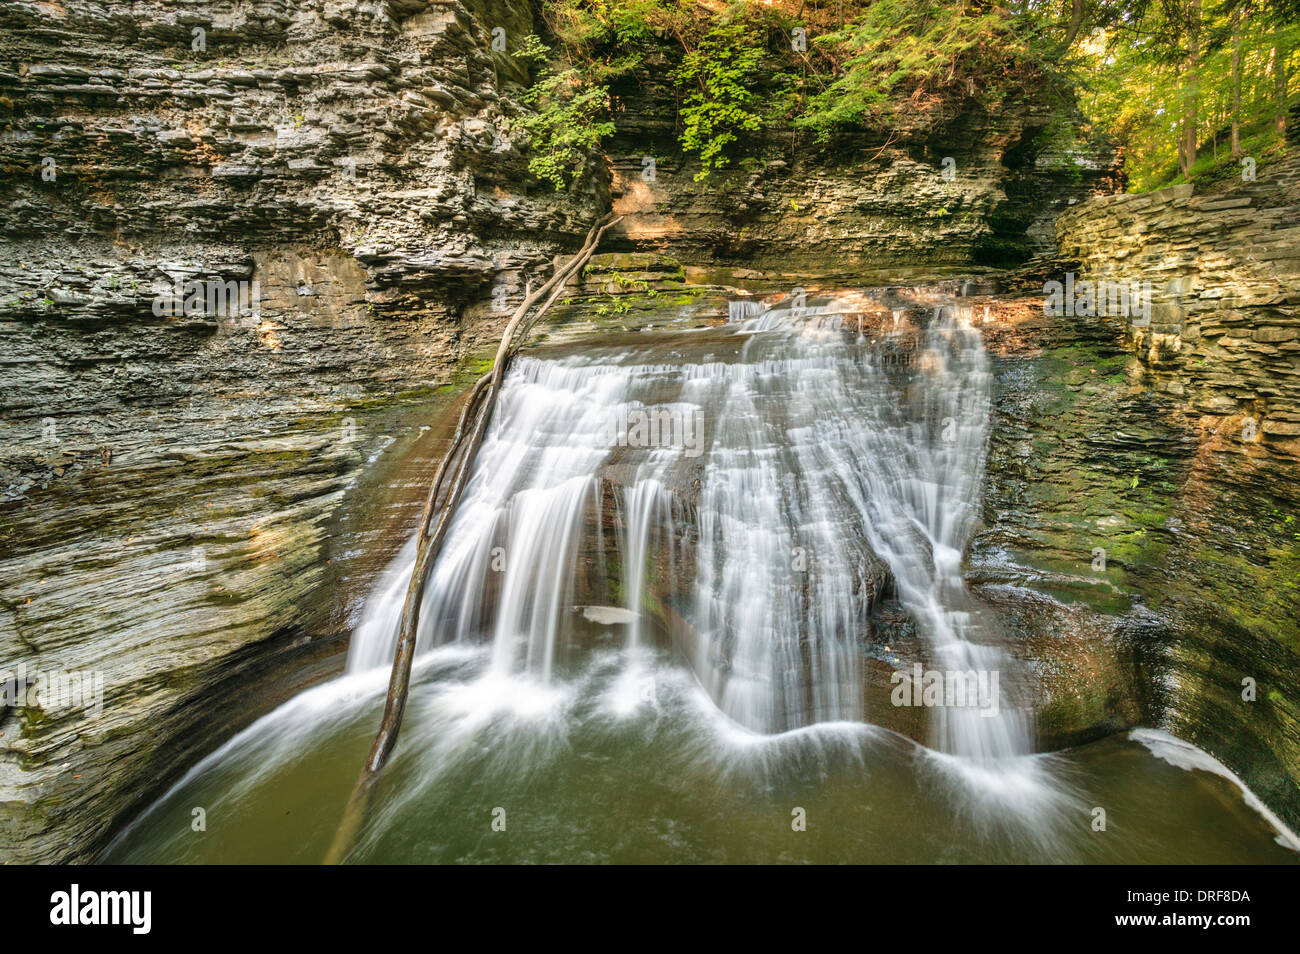 Buttermilk Falls State Park, Ithaca, Finger Lakes, New York State, is a wild cascade that empties into Cayuga Lake. Stock Photo